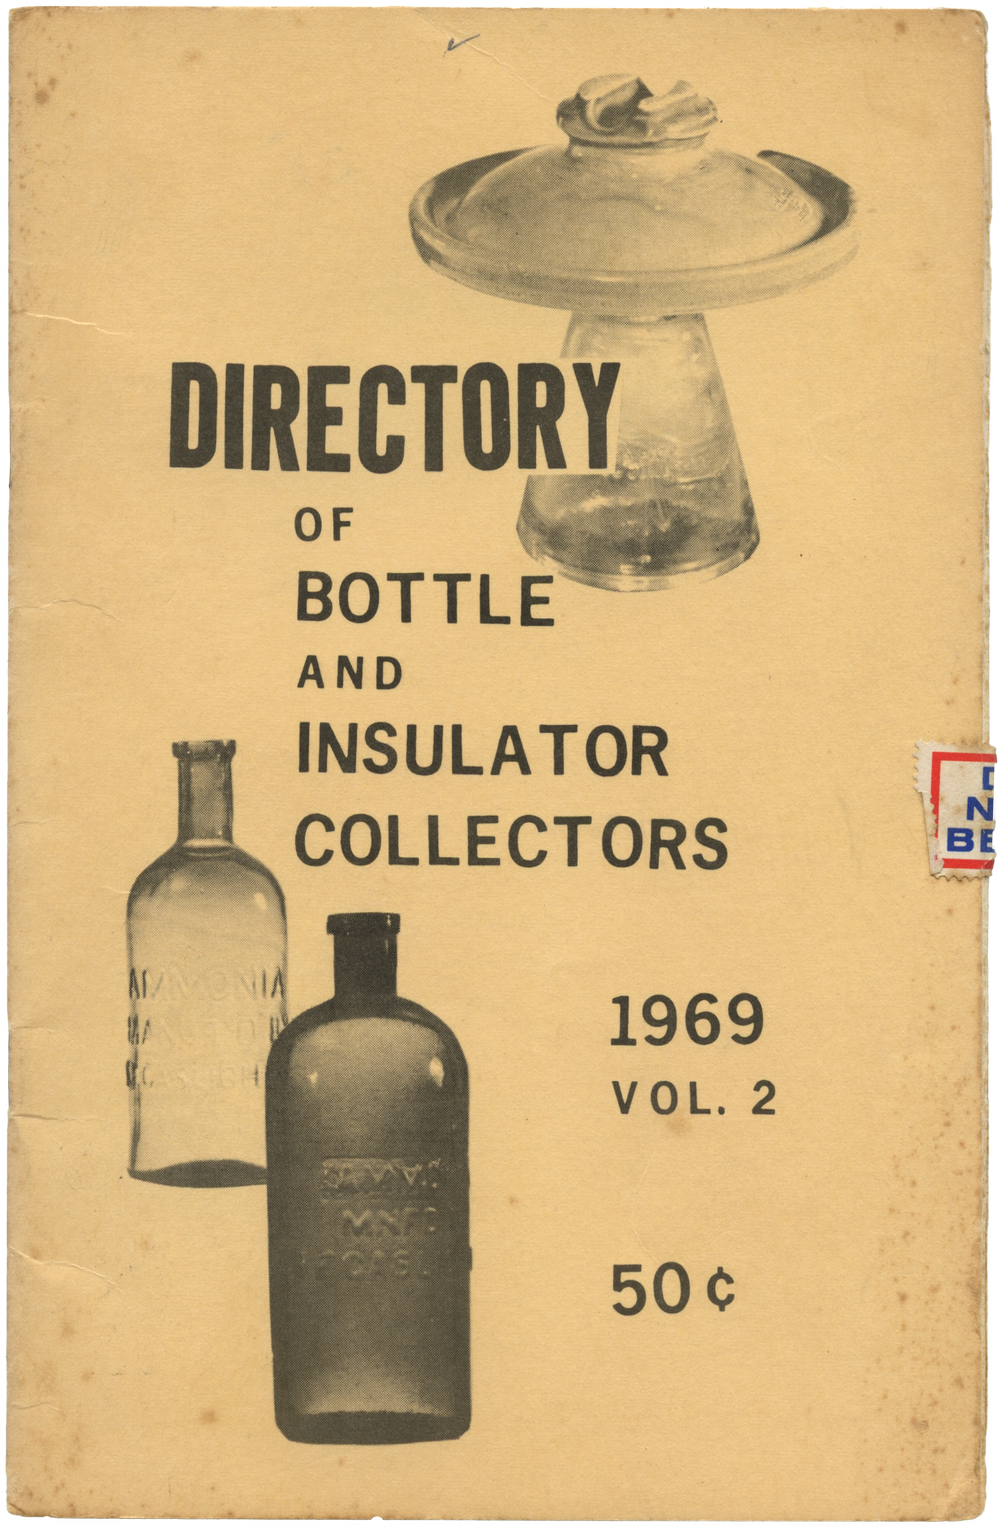 INS-1969-ZINE-DIRECTORY_OF_BOTTLE_AND_INSULATOR_COLLECTORS.png